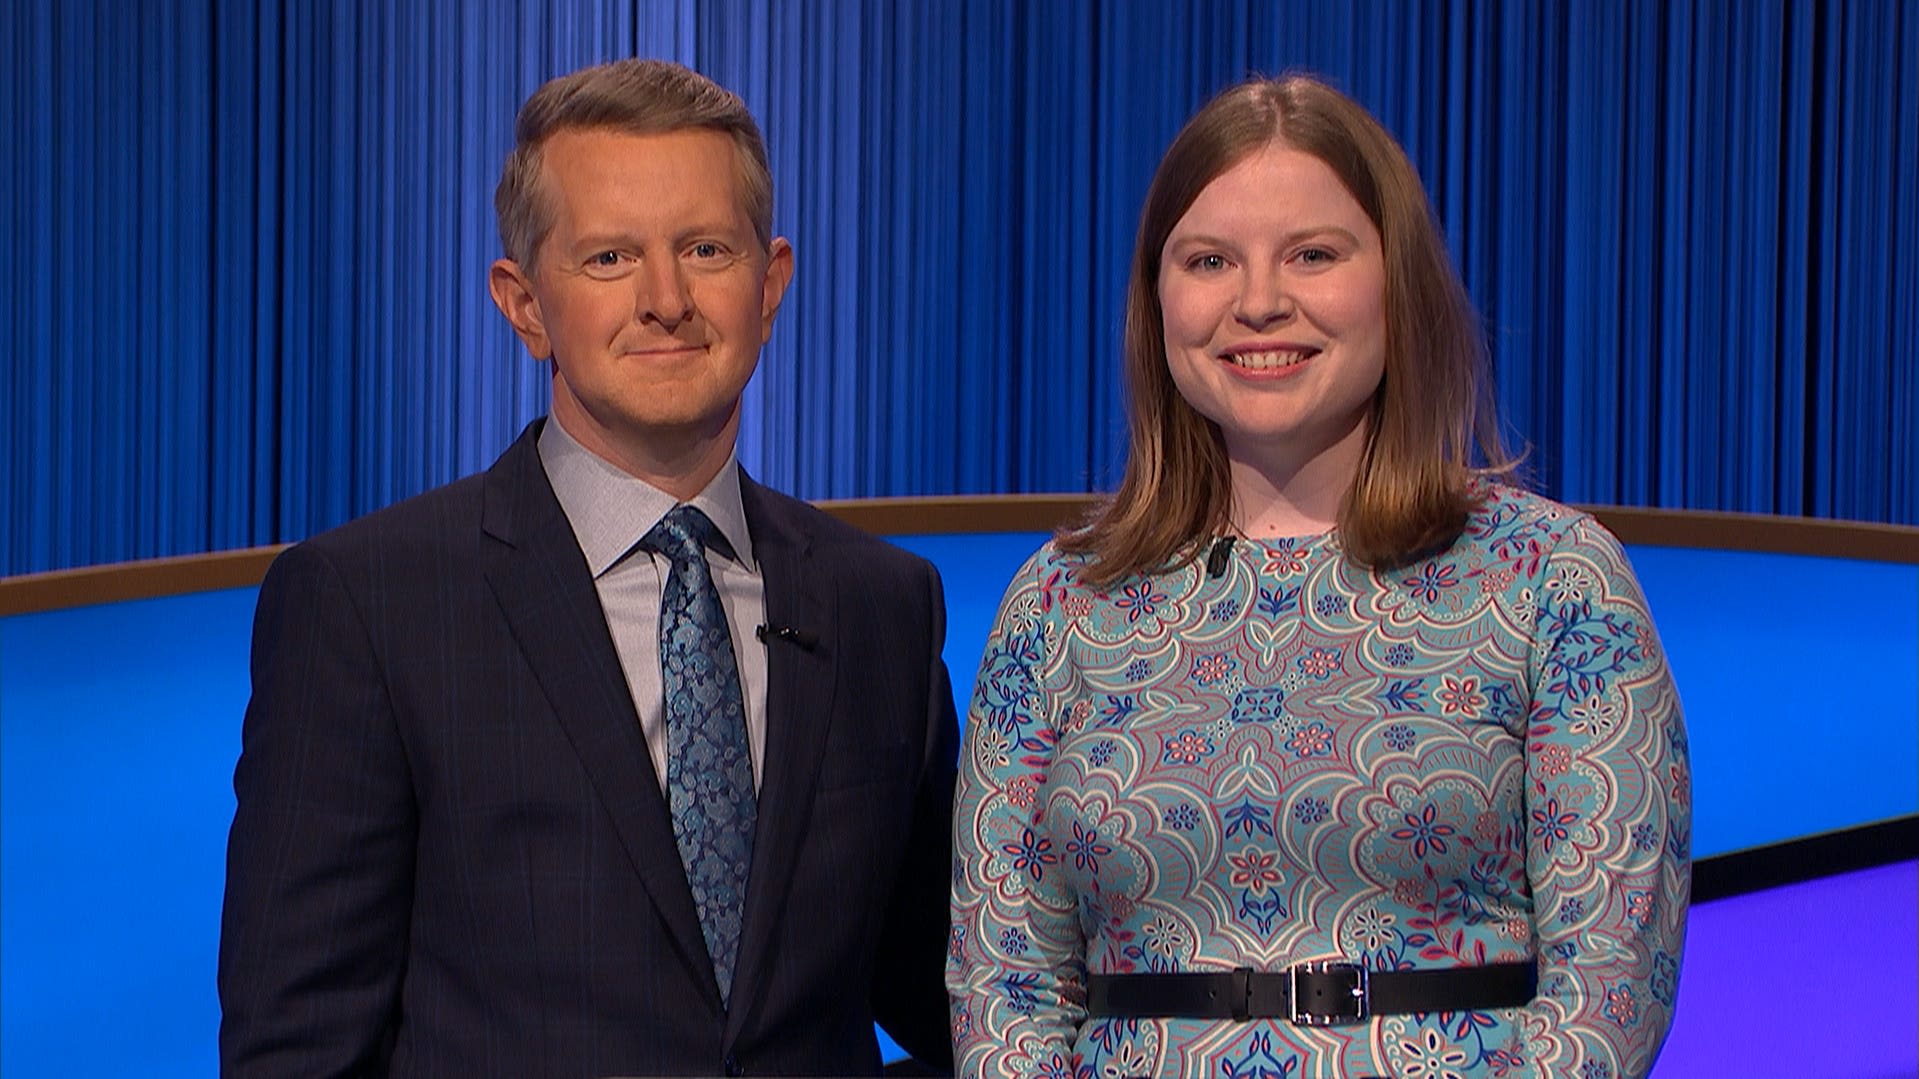 Who's on "Jeopardy!" today, June 4? Purdue archivist Adriana Harmeyer looks to win 5th game